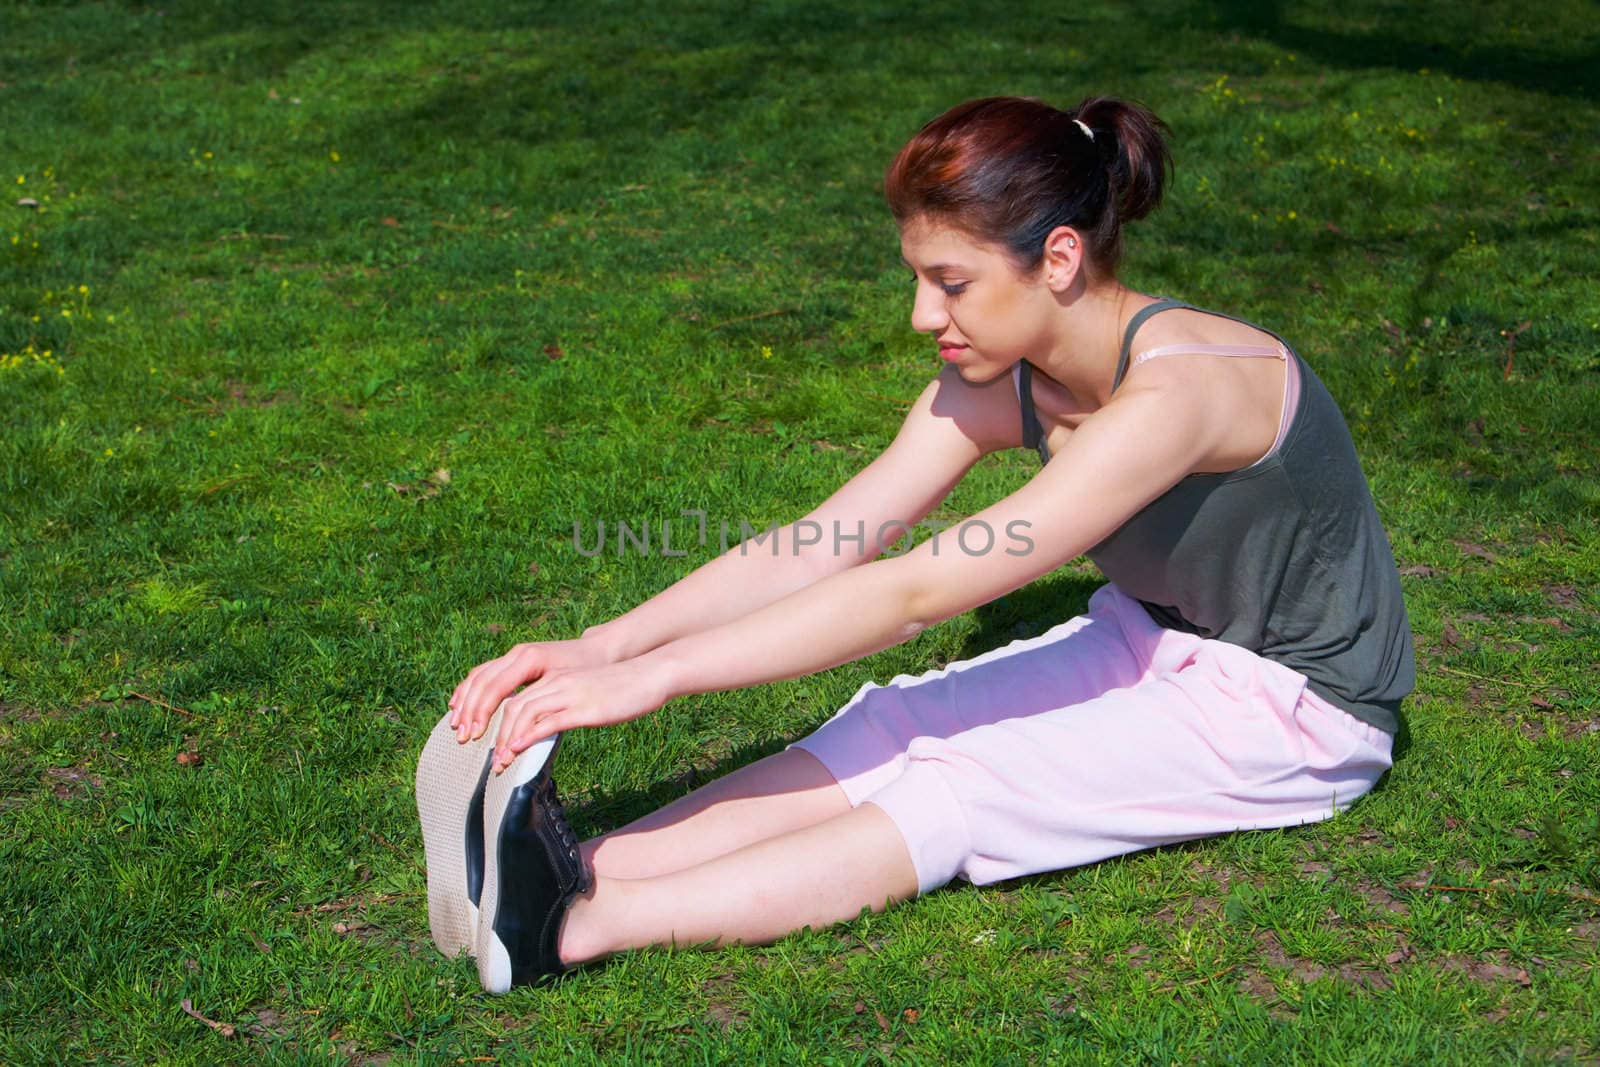 Teenage girl stretching in park, side view